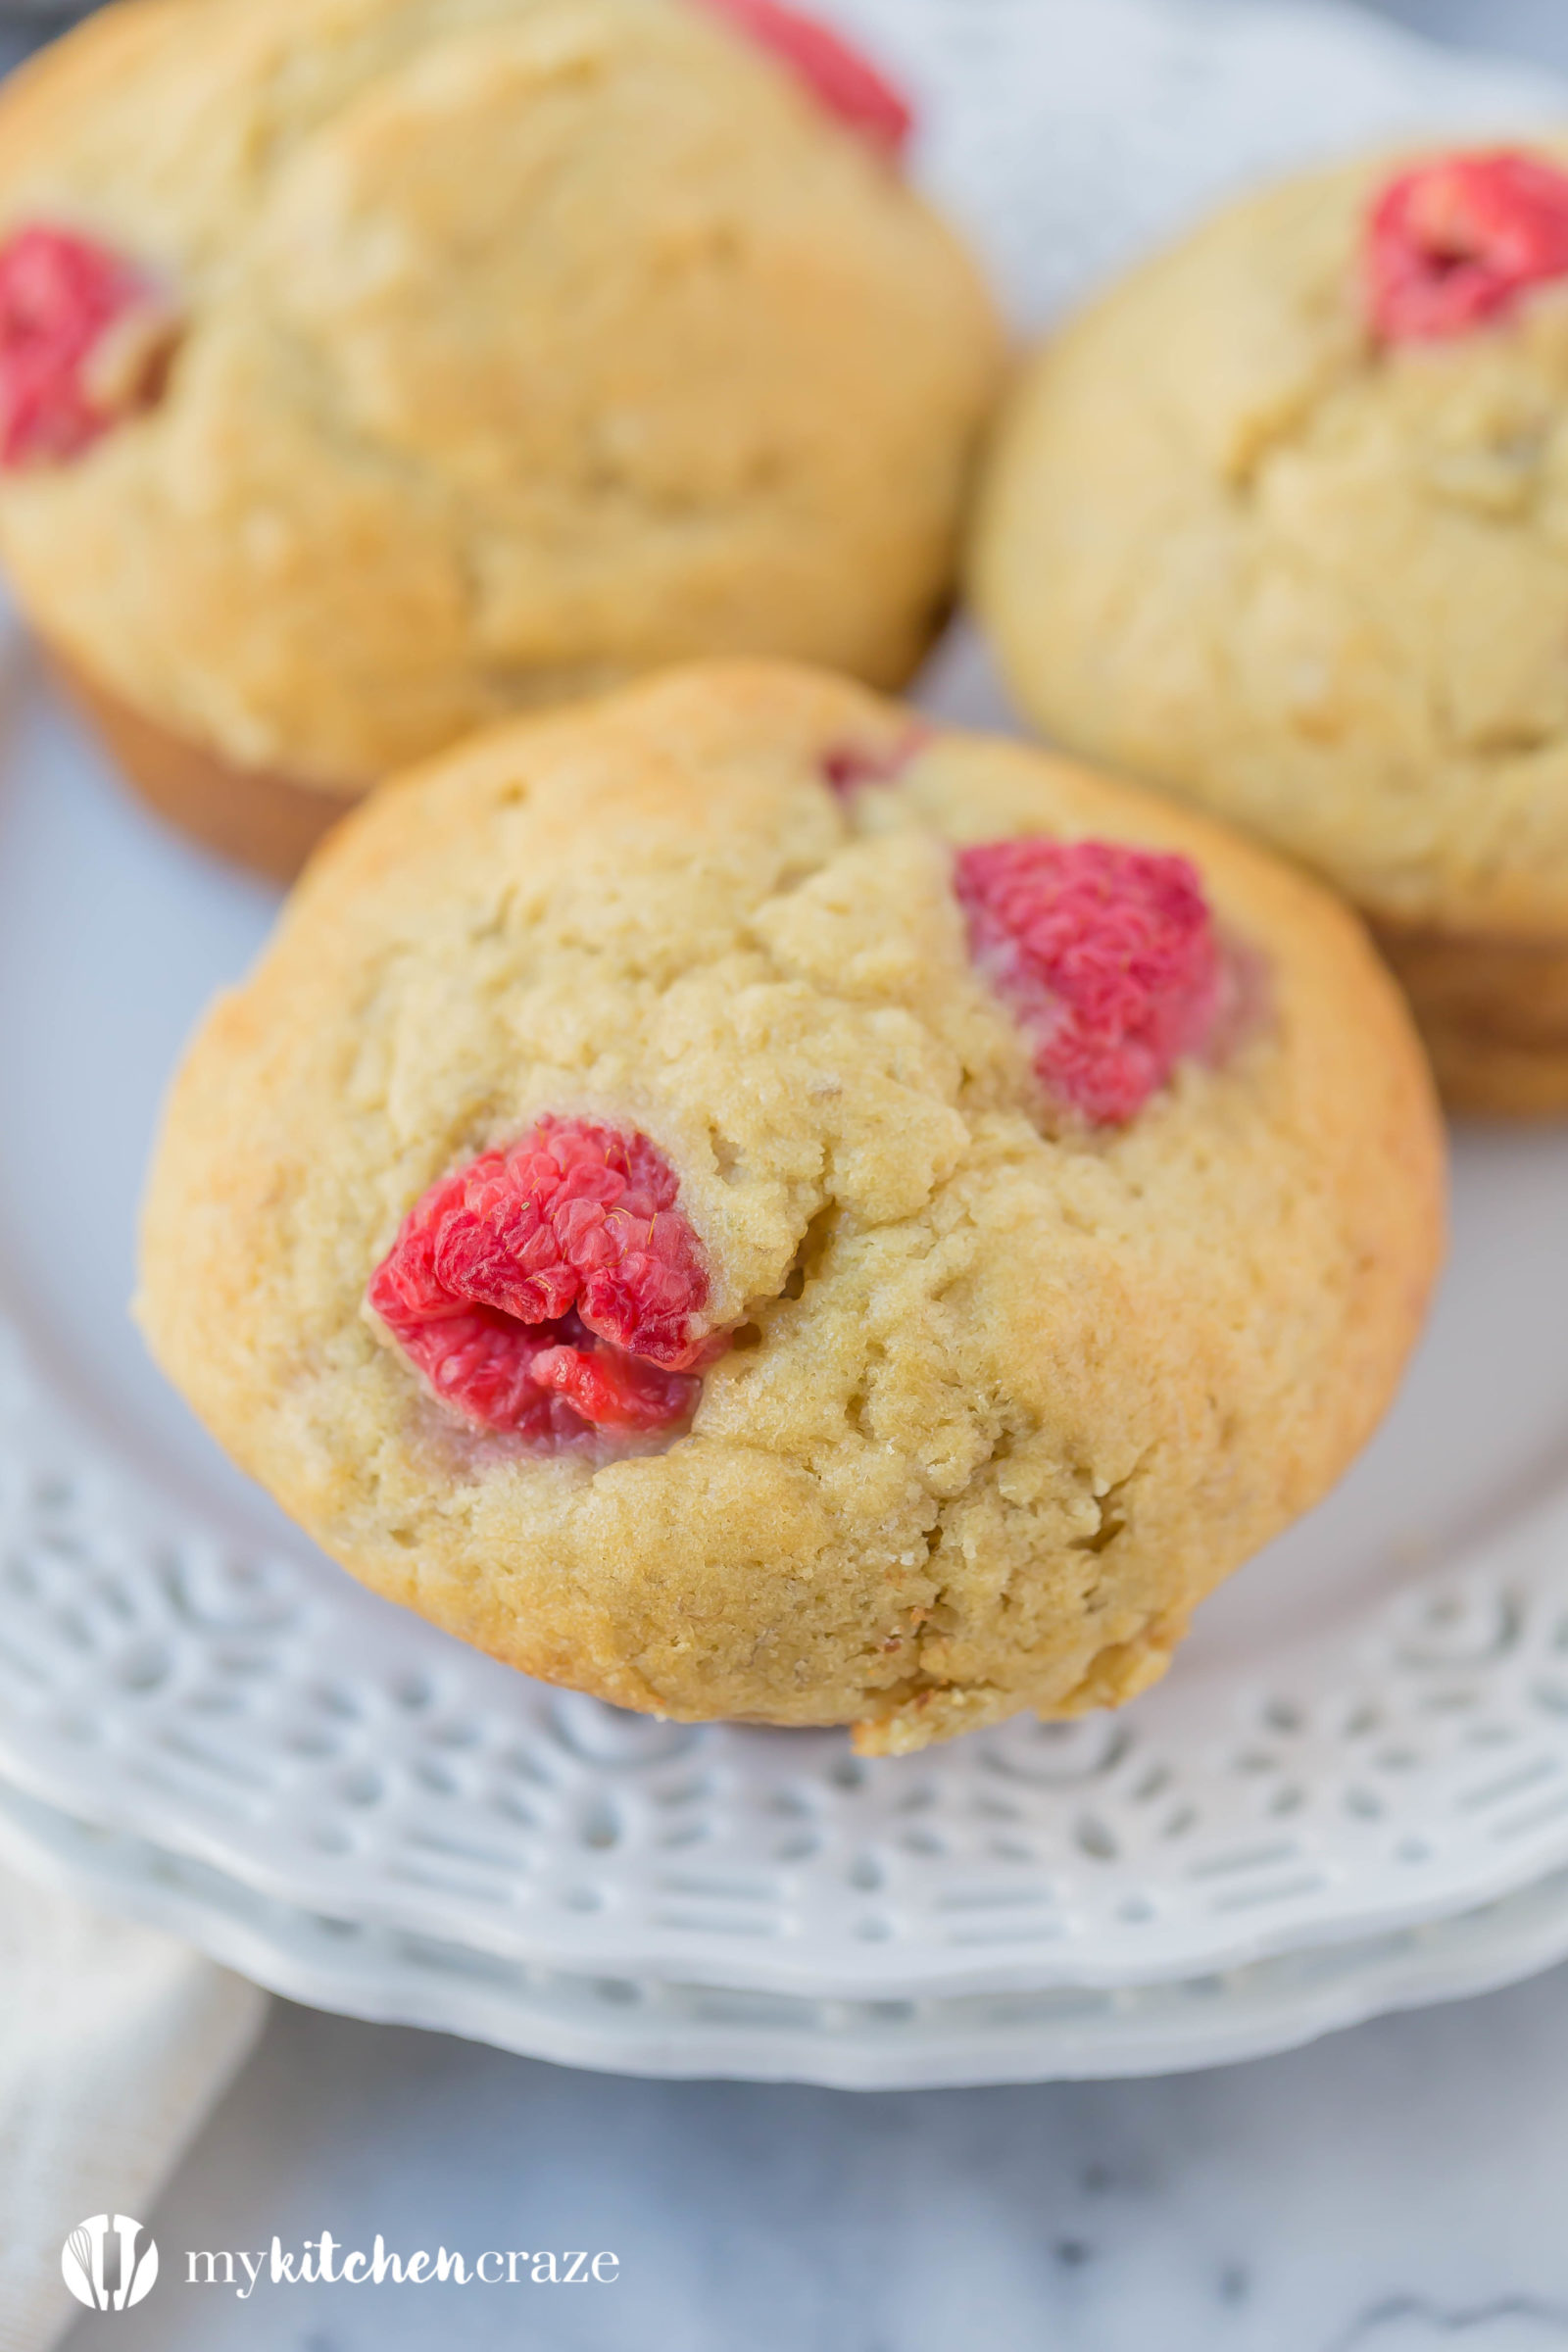 Raspberry Banana Muffins ~ Do you have some ripe bananas and fresh raspberries sitting around? Then you need to make these Raspberry Banana Muffins. Moist and all the right flavors.